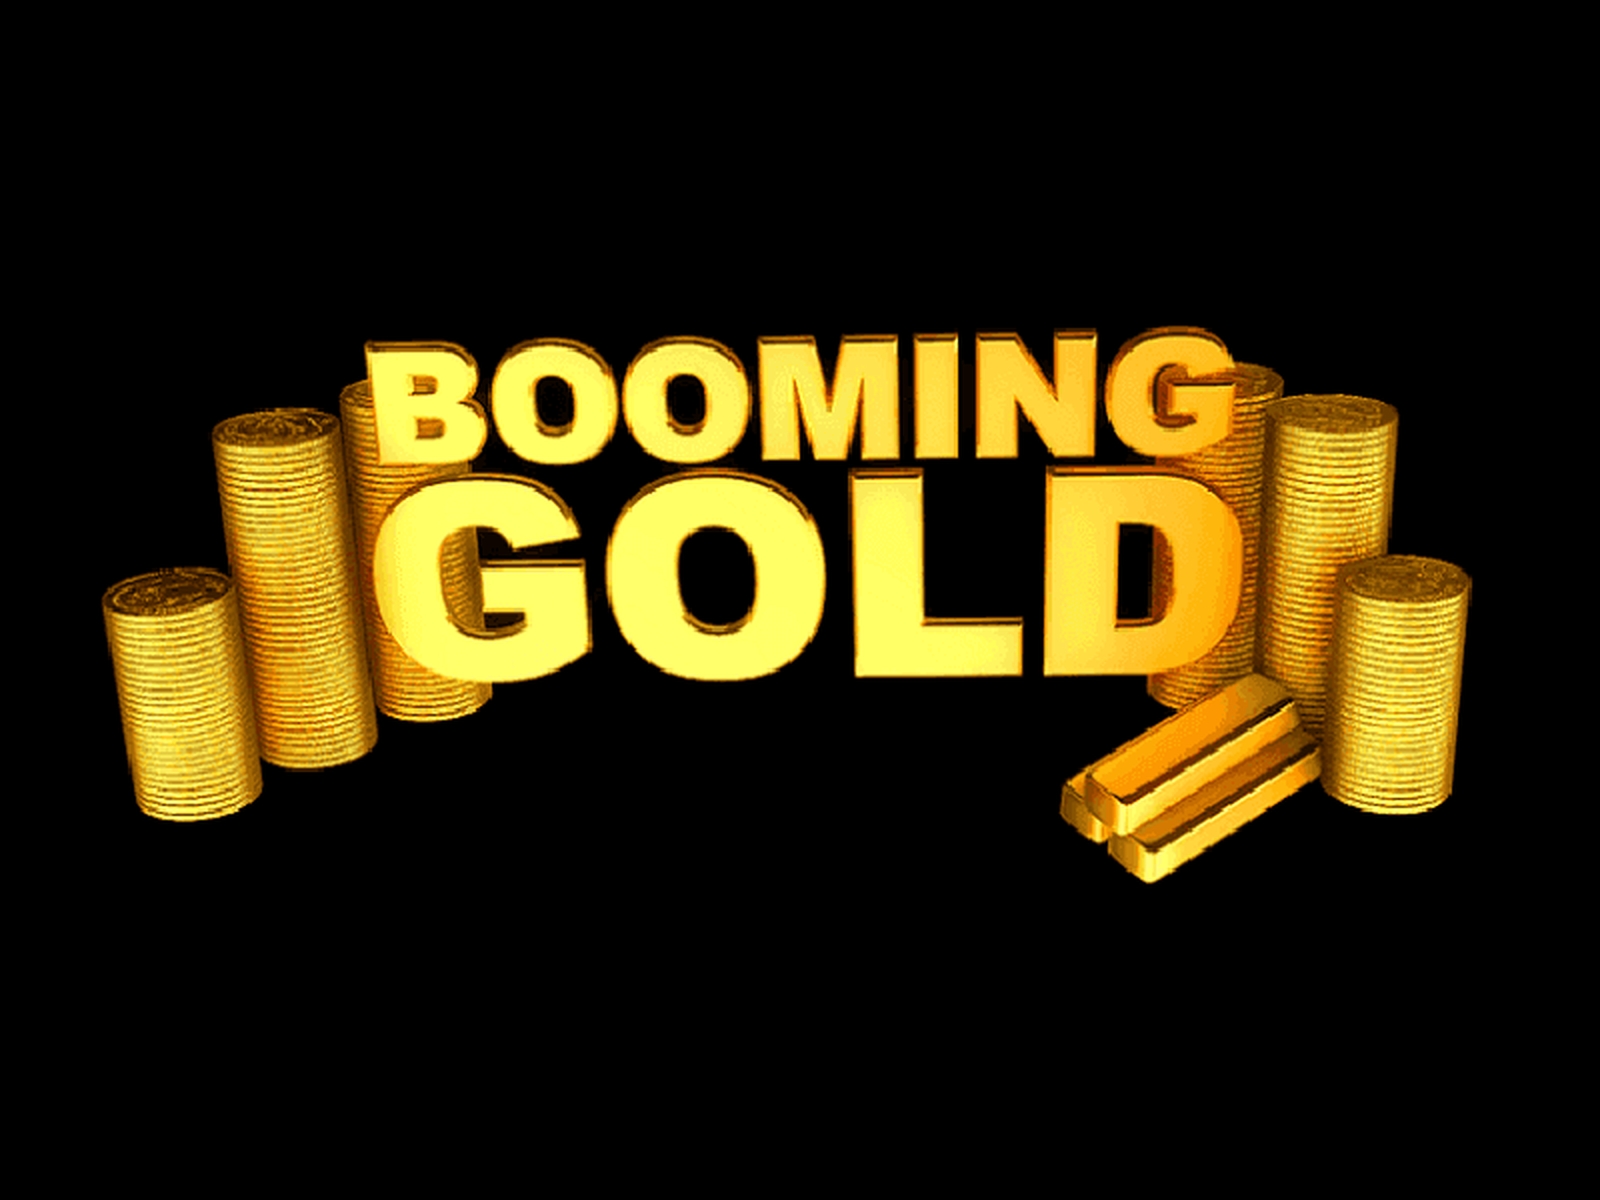 Booming Gold demo